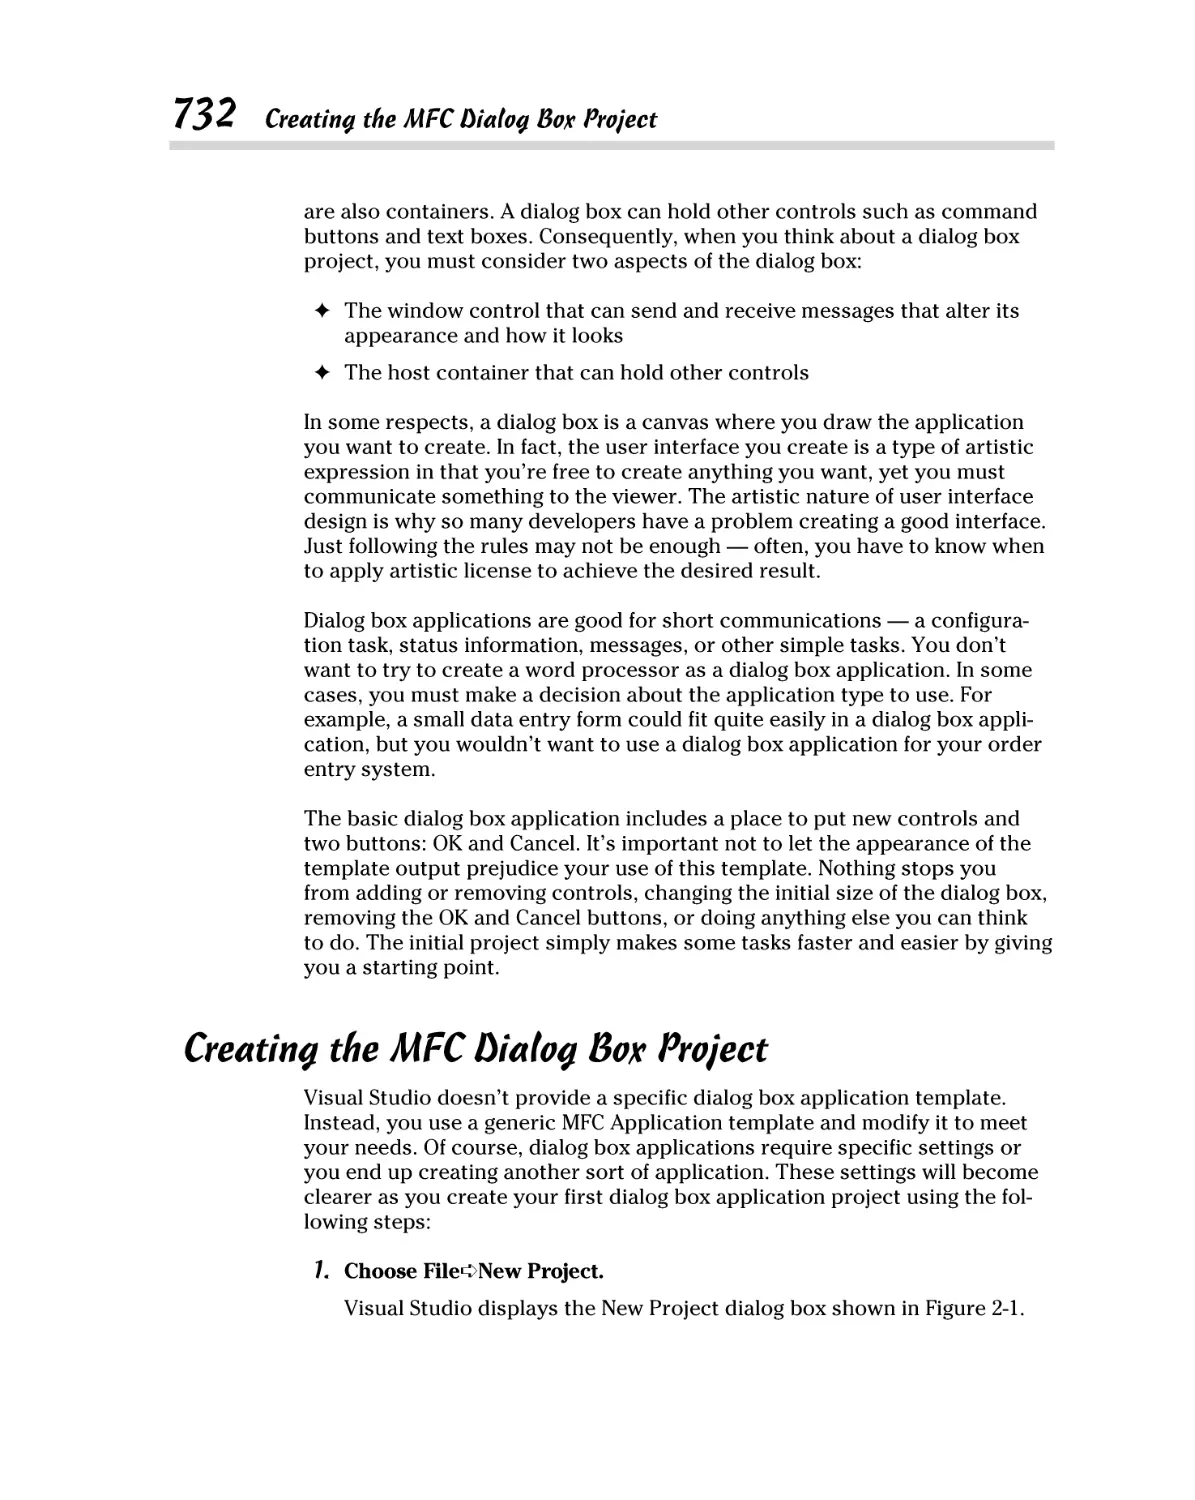 Creating the MFC Dialog Box Project